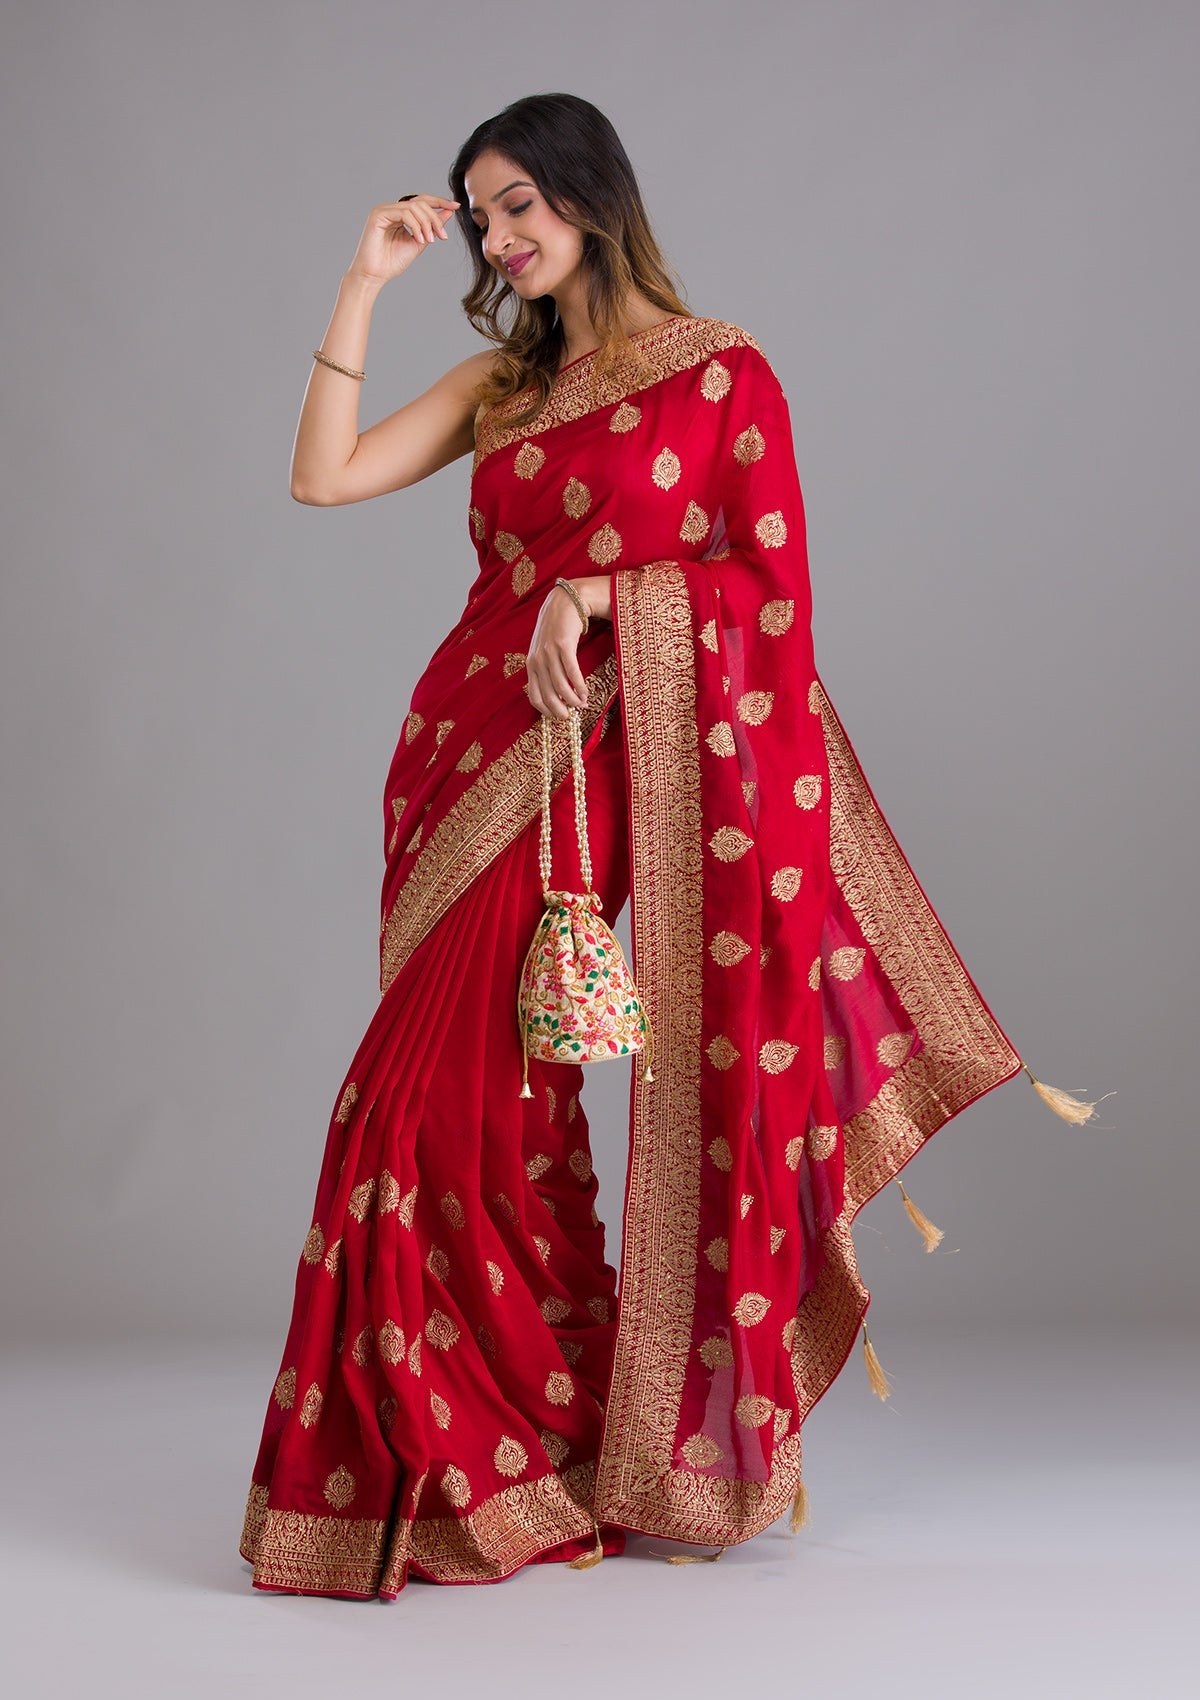 Red Saree - Buy Red Colour Saris Online At Best Prices – Koskii